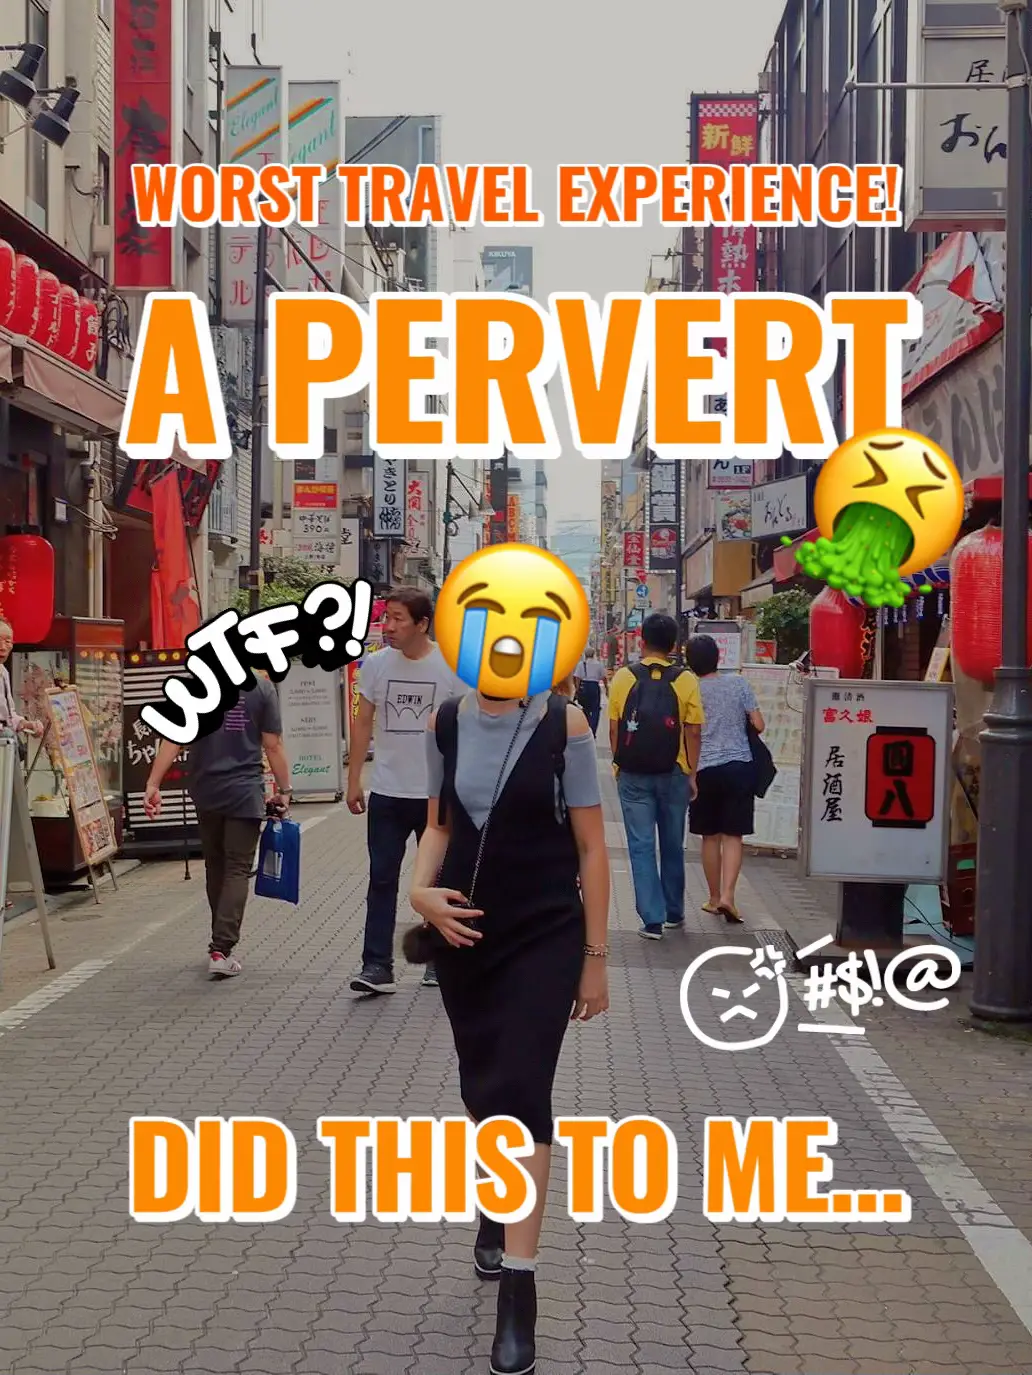 MY WTF TRAUMATIC TRAVEL STORY WITH A PERVERT! 😭🤮🫠's images(0)